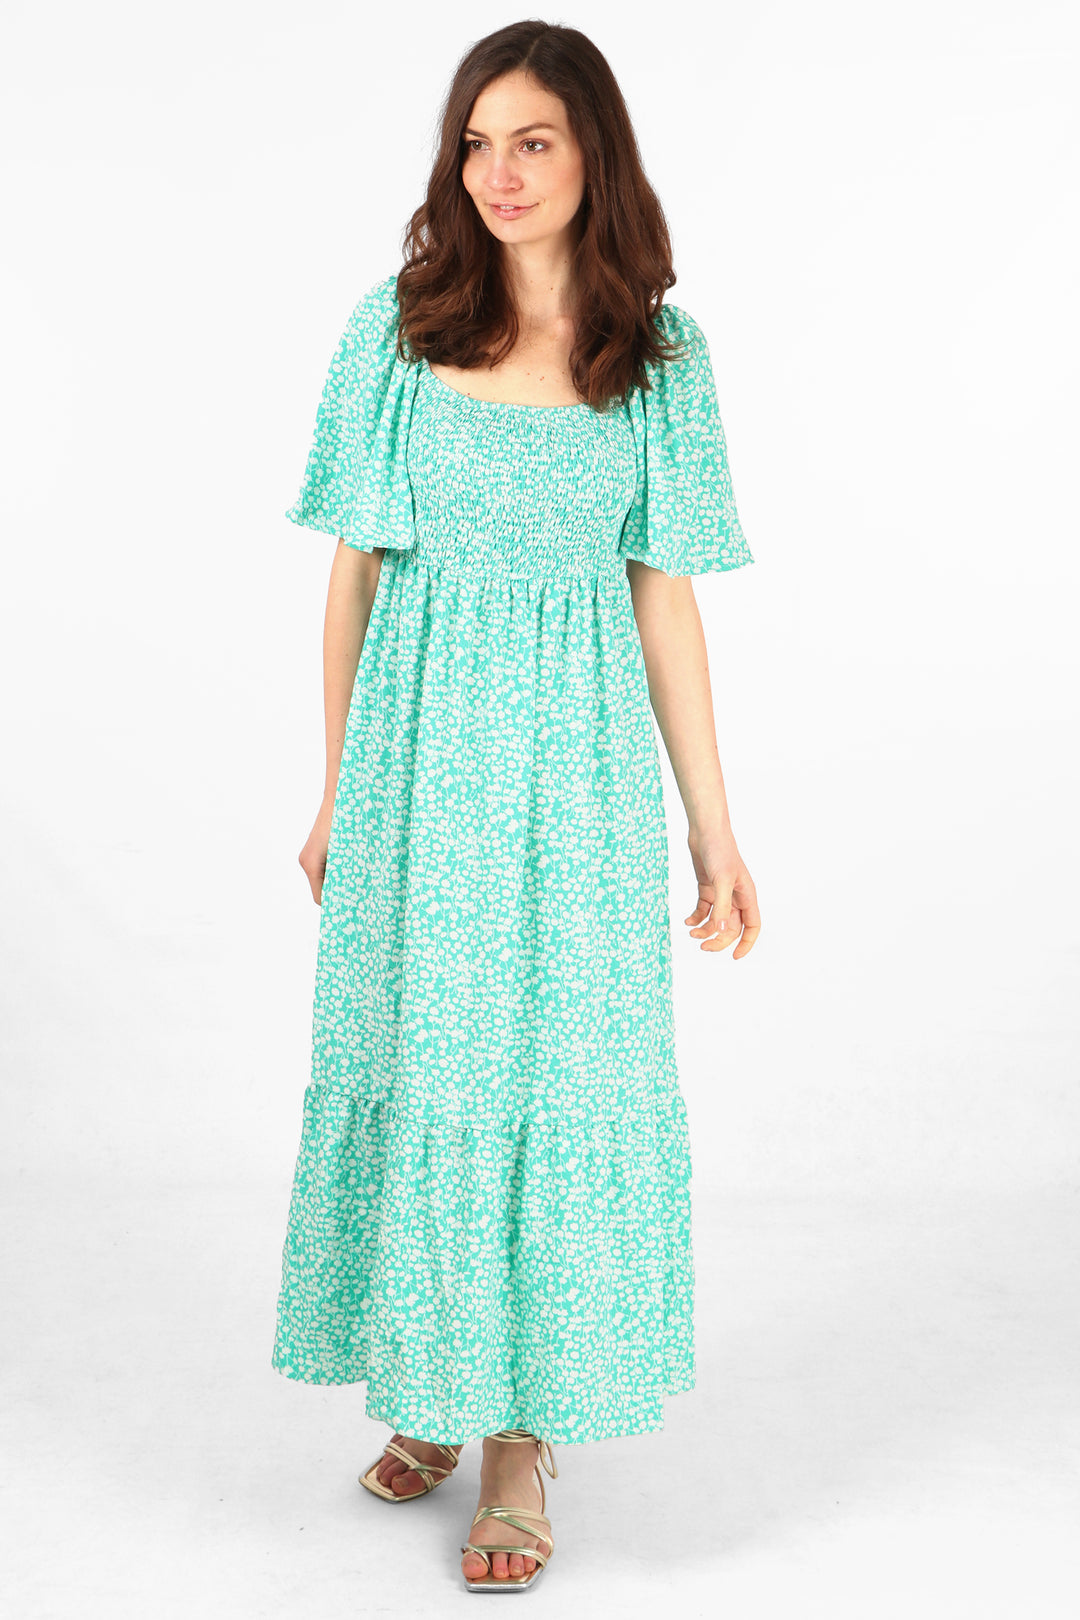 model wearing a green and white ditsy floral maxi milkmaid dress with shirred bodice and short bell sleeves